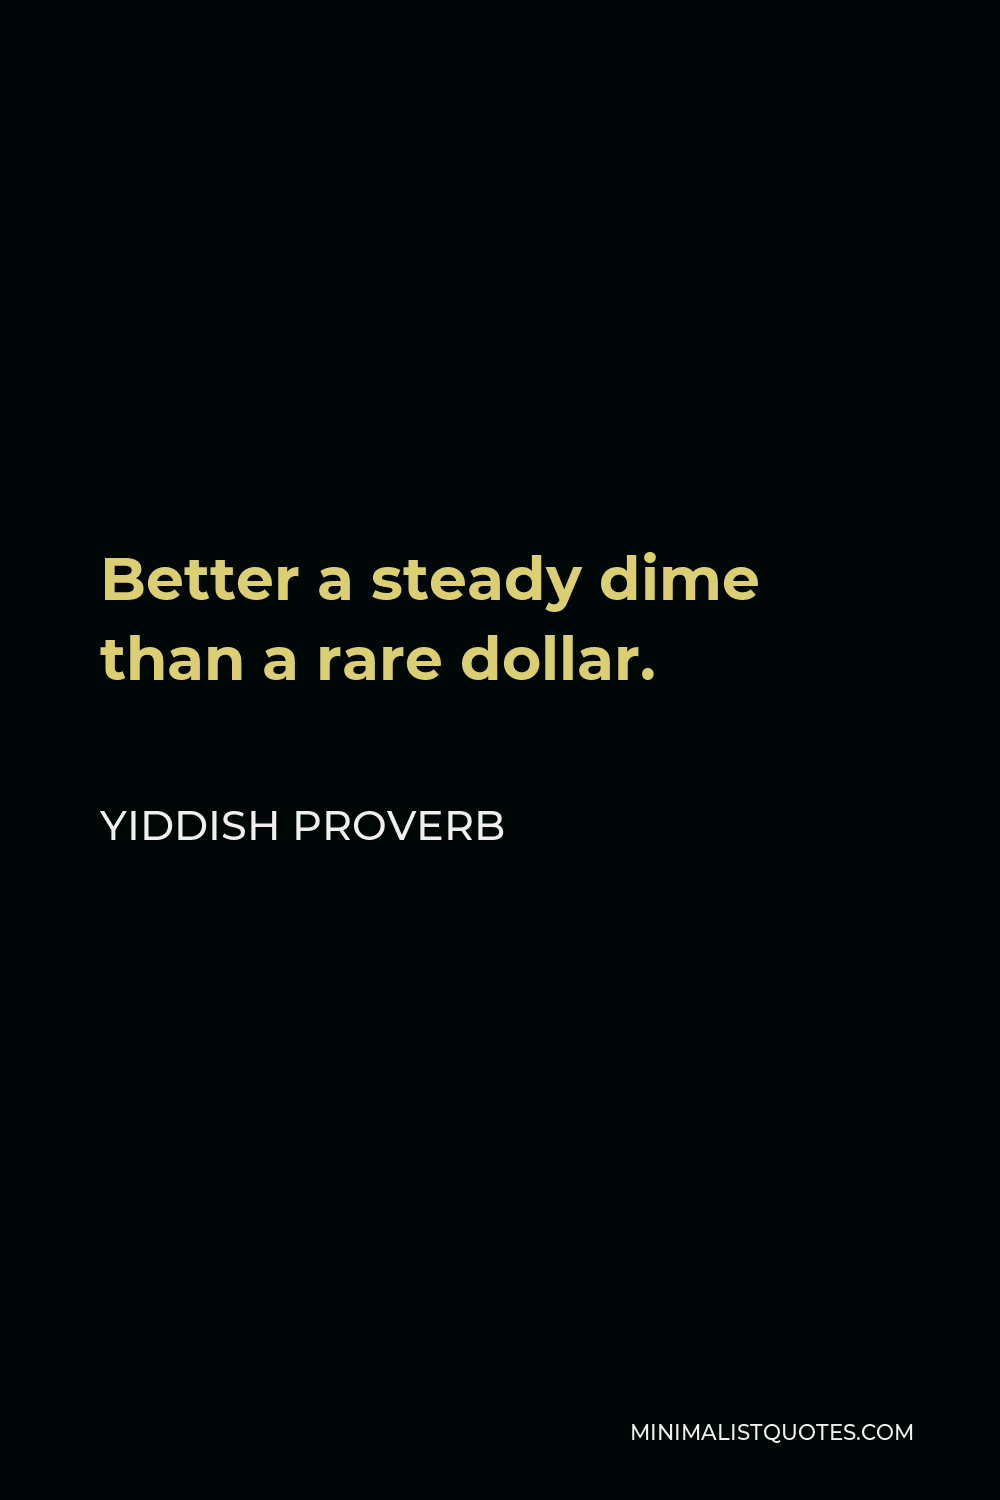 Yiddish Proverb Quote - Better a steady dime than a rare dollar.